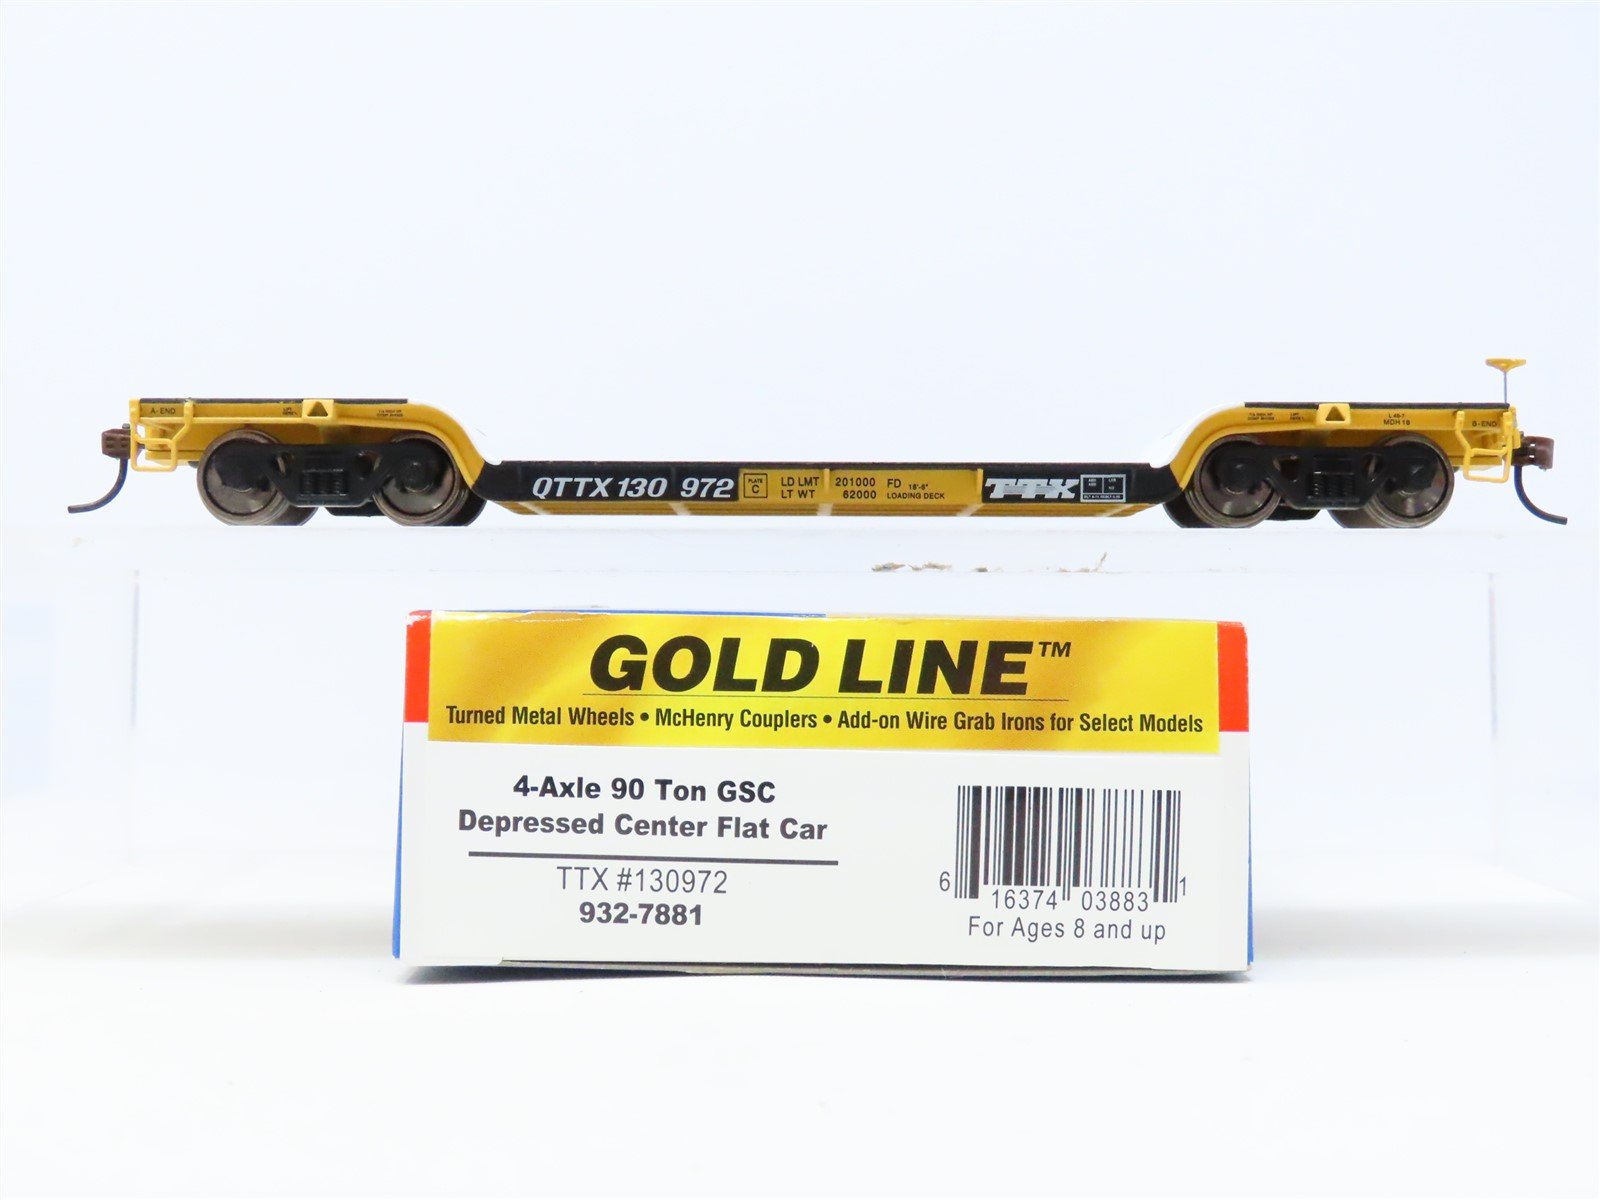 HO Scale Walthers Gold Line 932-7881 QTTX Depressed Center Flat 